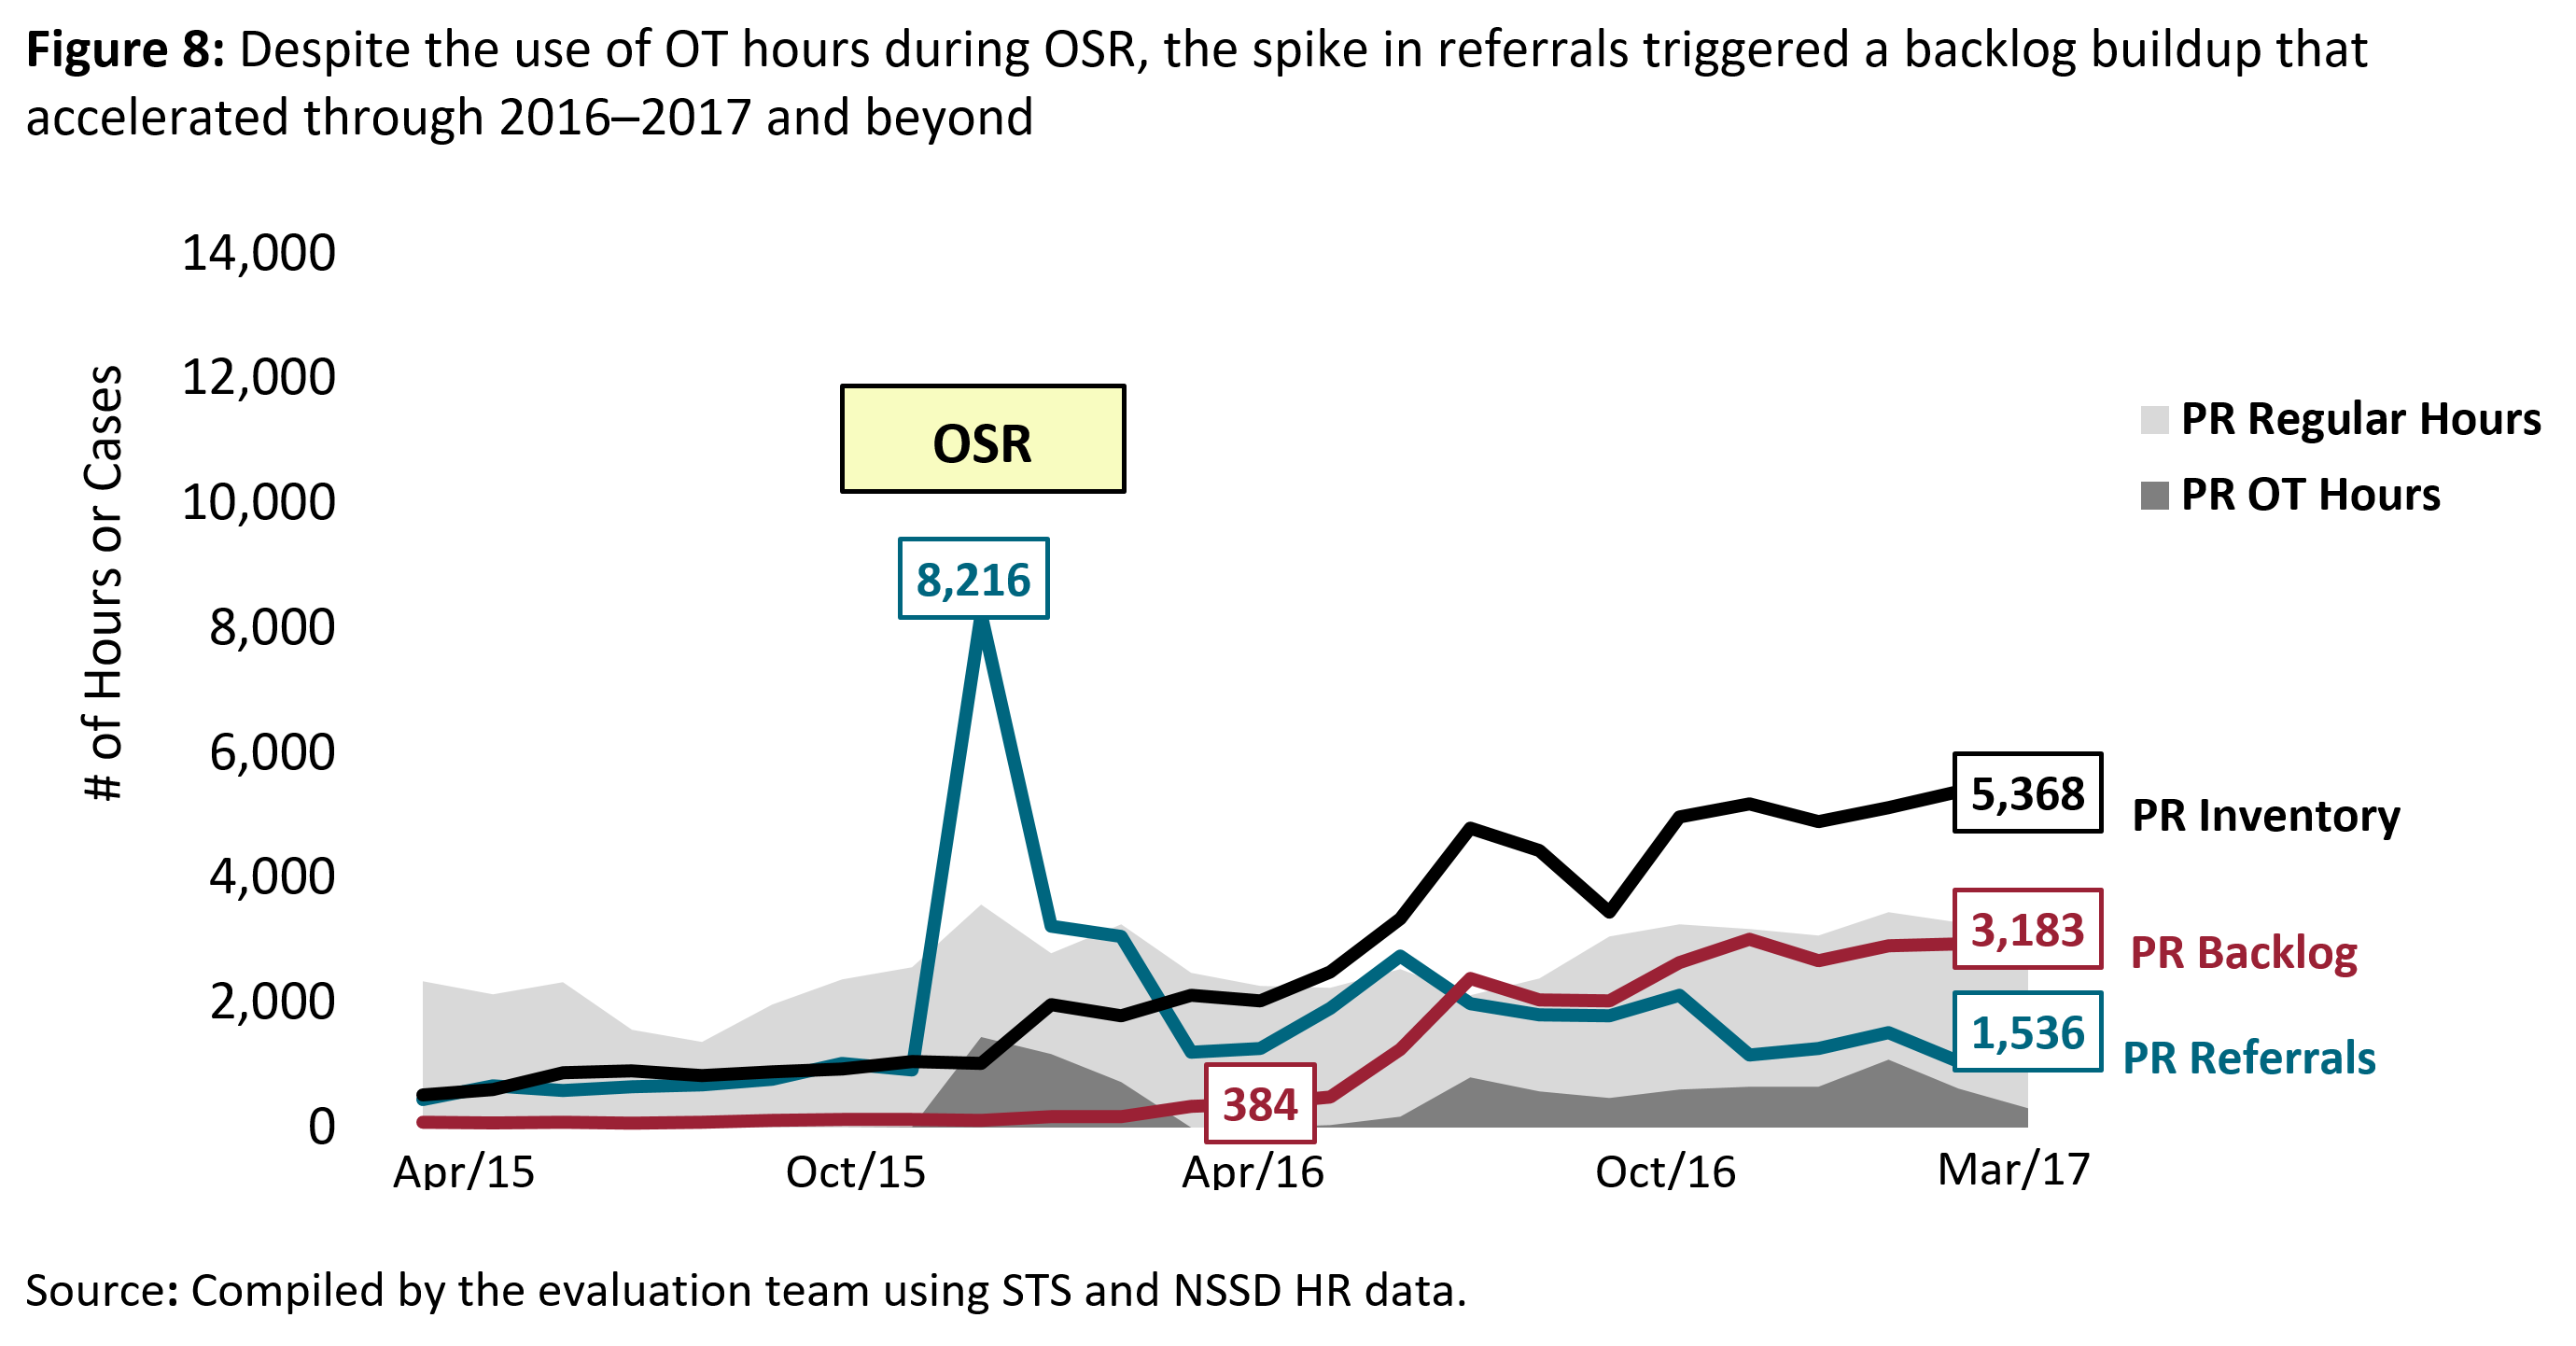 Figure 8: Despite the use of <abbr>OT</abbr> hours during <abbr>OSR</abbr>, the spike in referrals triggered a backlog buildup that accelerated through 2016 to 2017 and beyond